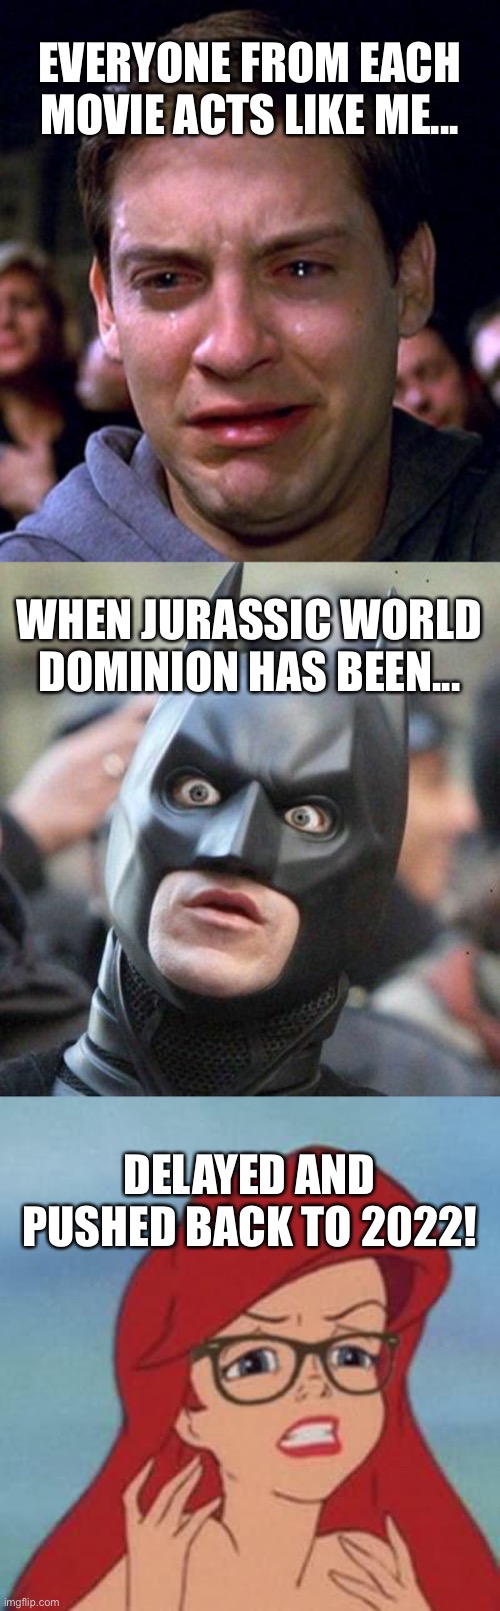 Reaction to Delayed Jurassic World Dominion | EVERYONE FROM EACH MOVIE ACTS LIKE ME... WHEN JURASSIC WORLD DOMINION HAS BEEN... DELAYED AND PUSHED BACK TO 2022! | image tagged in memes,hipster ariel,shocked batman,crying peter parker,jurassic world | made w/ Imgflip meme maker